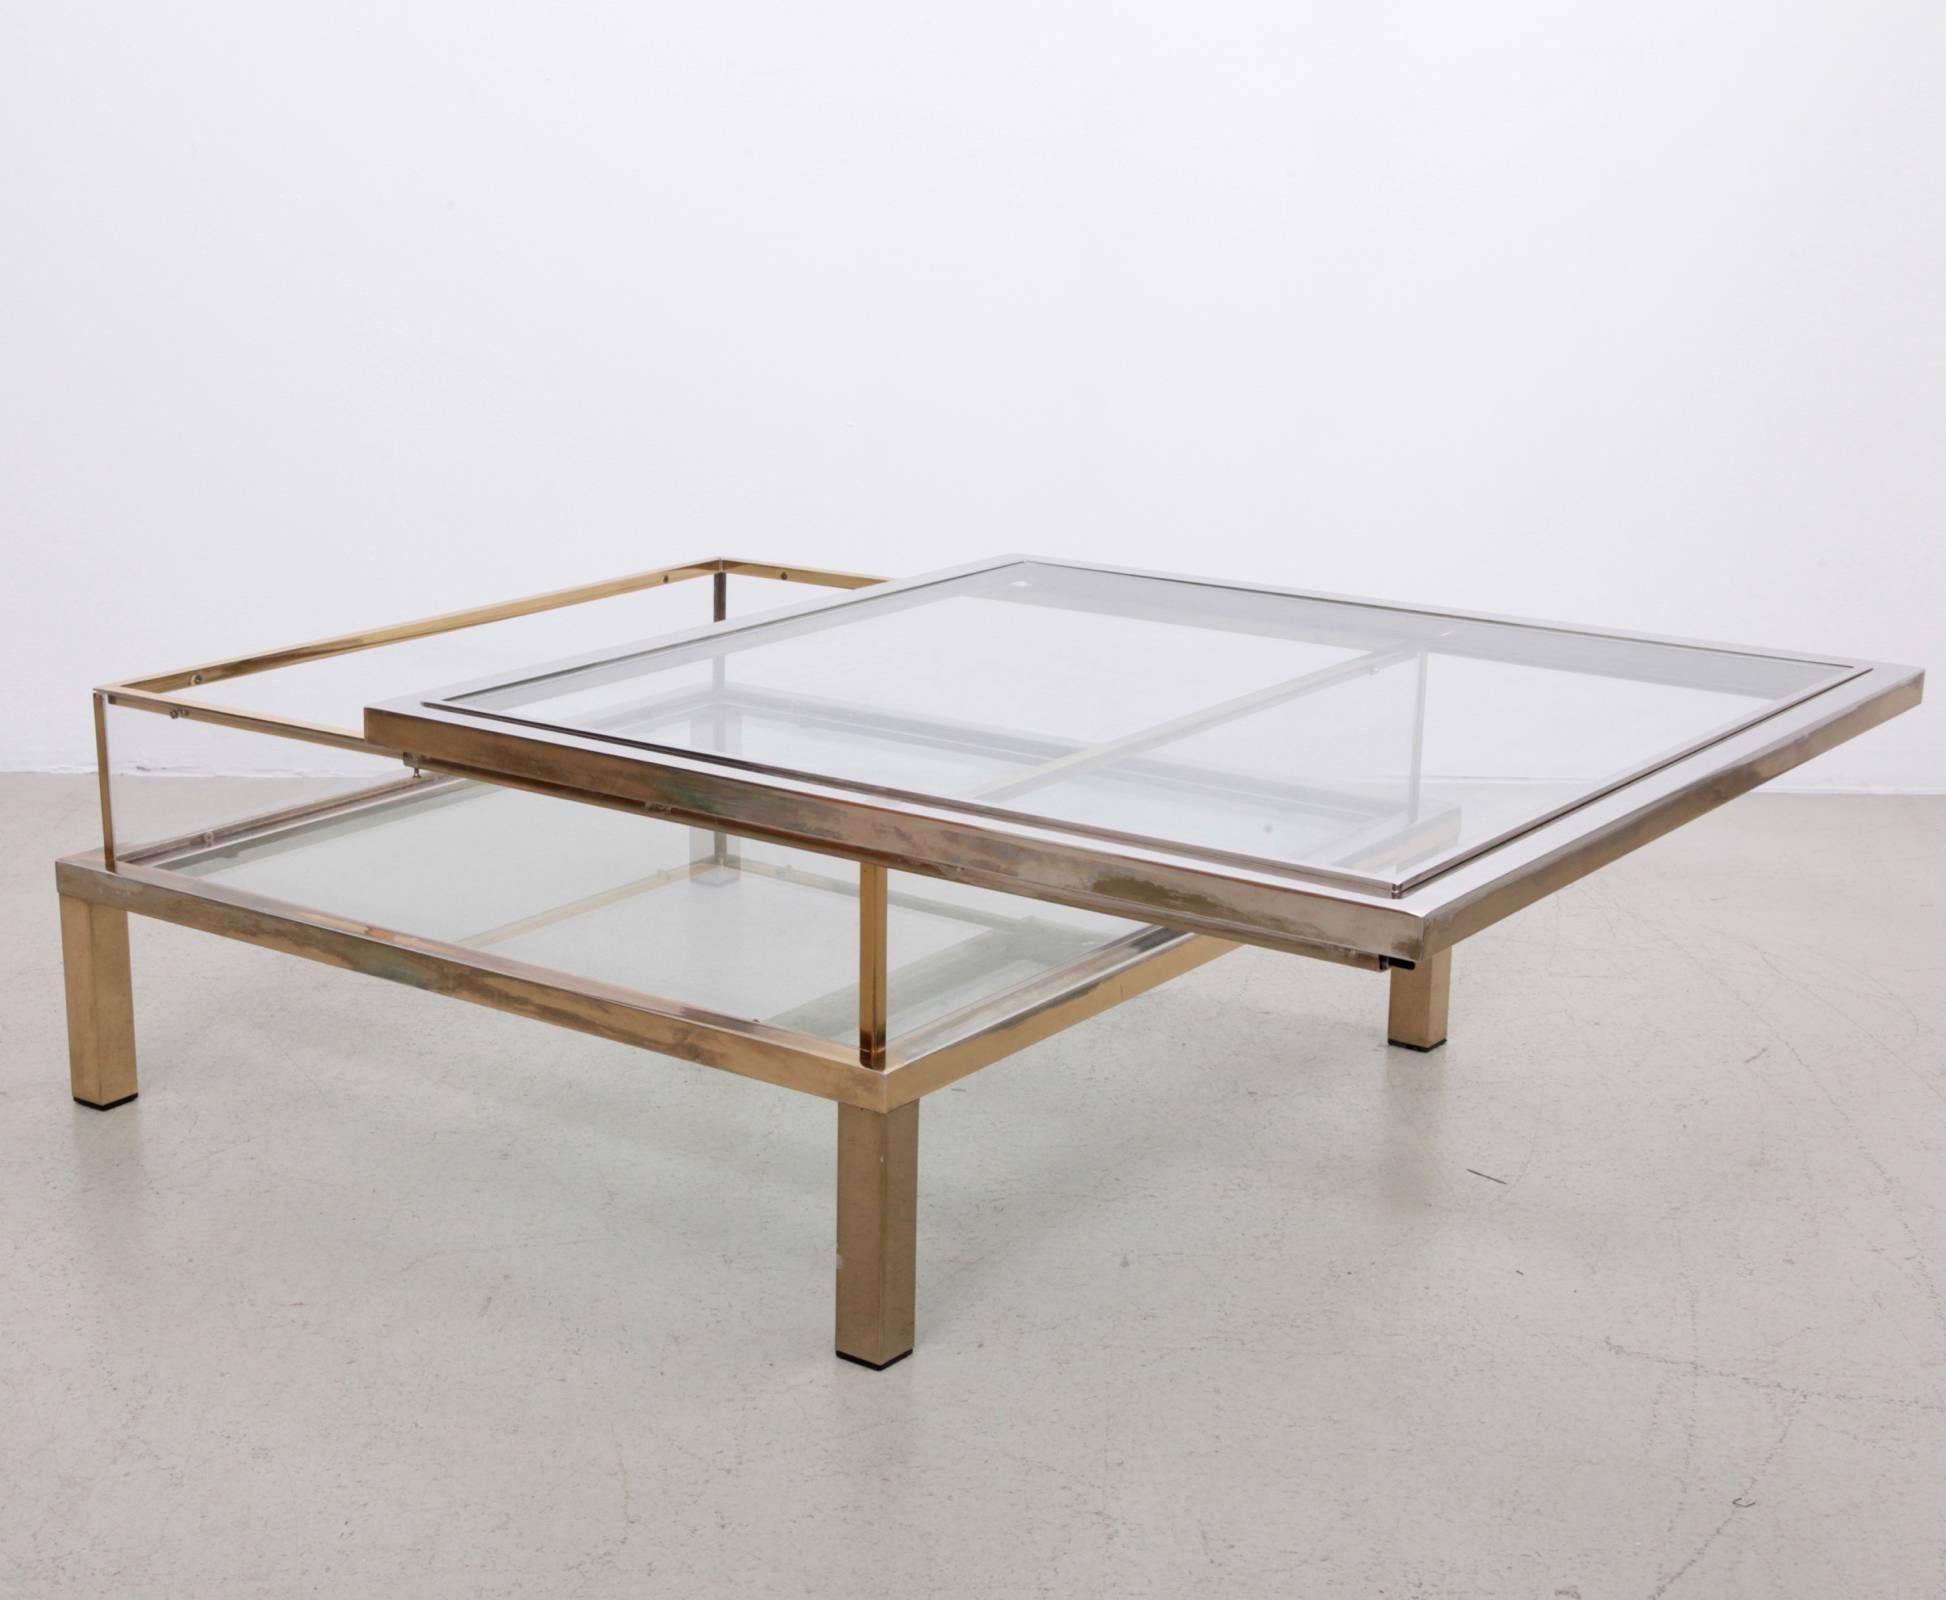 Large square glass table with sliding top by Maison Jansen. Frame has an total original gold-plated and chrome metal finish. The table shows a nice patina.

